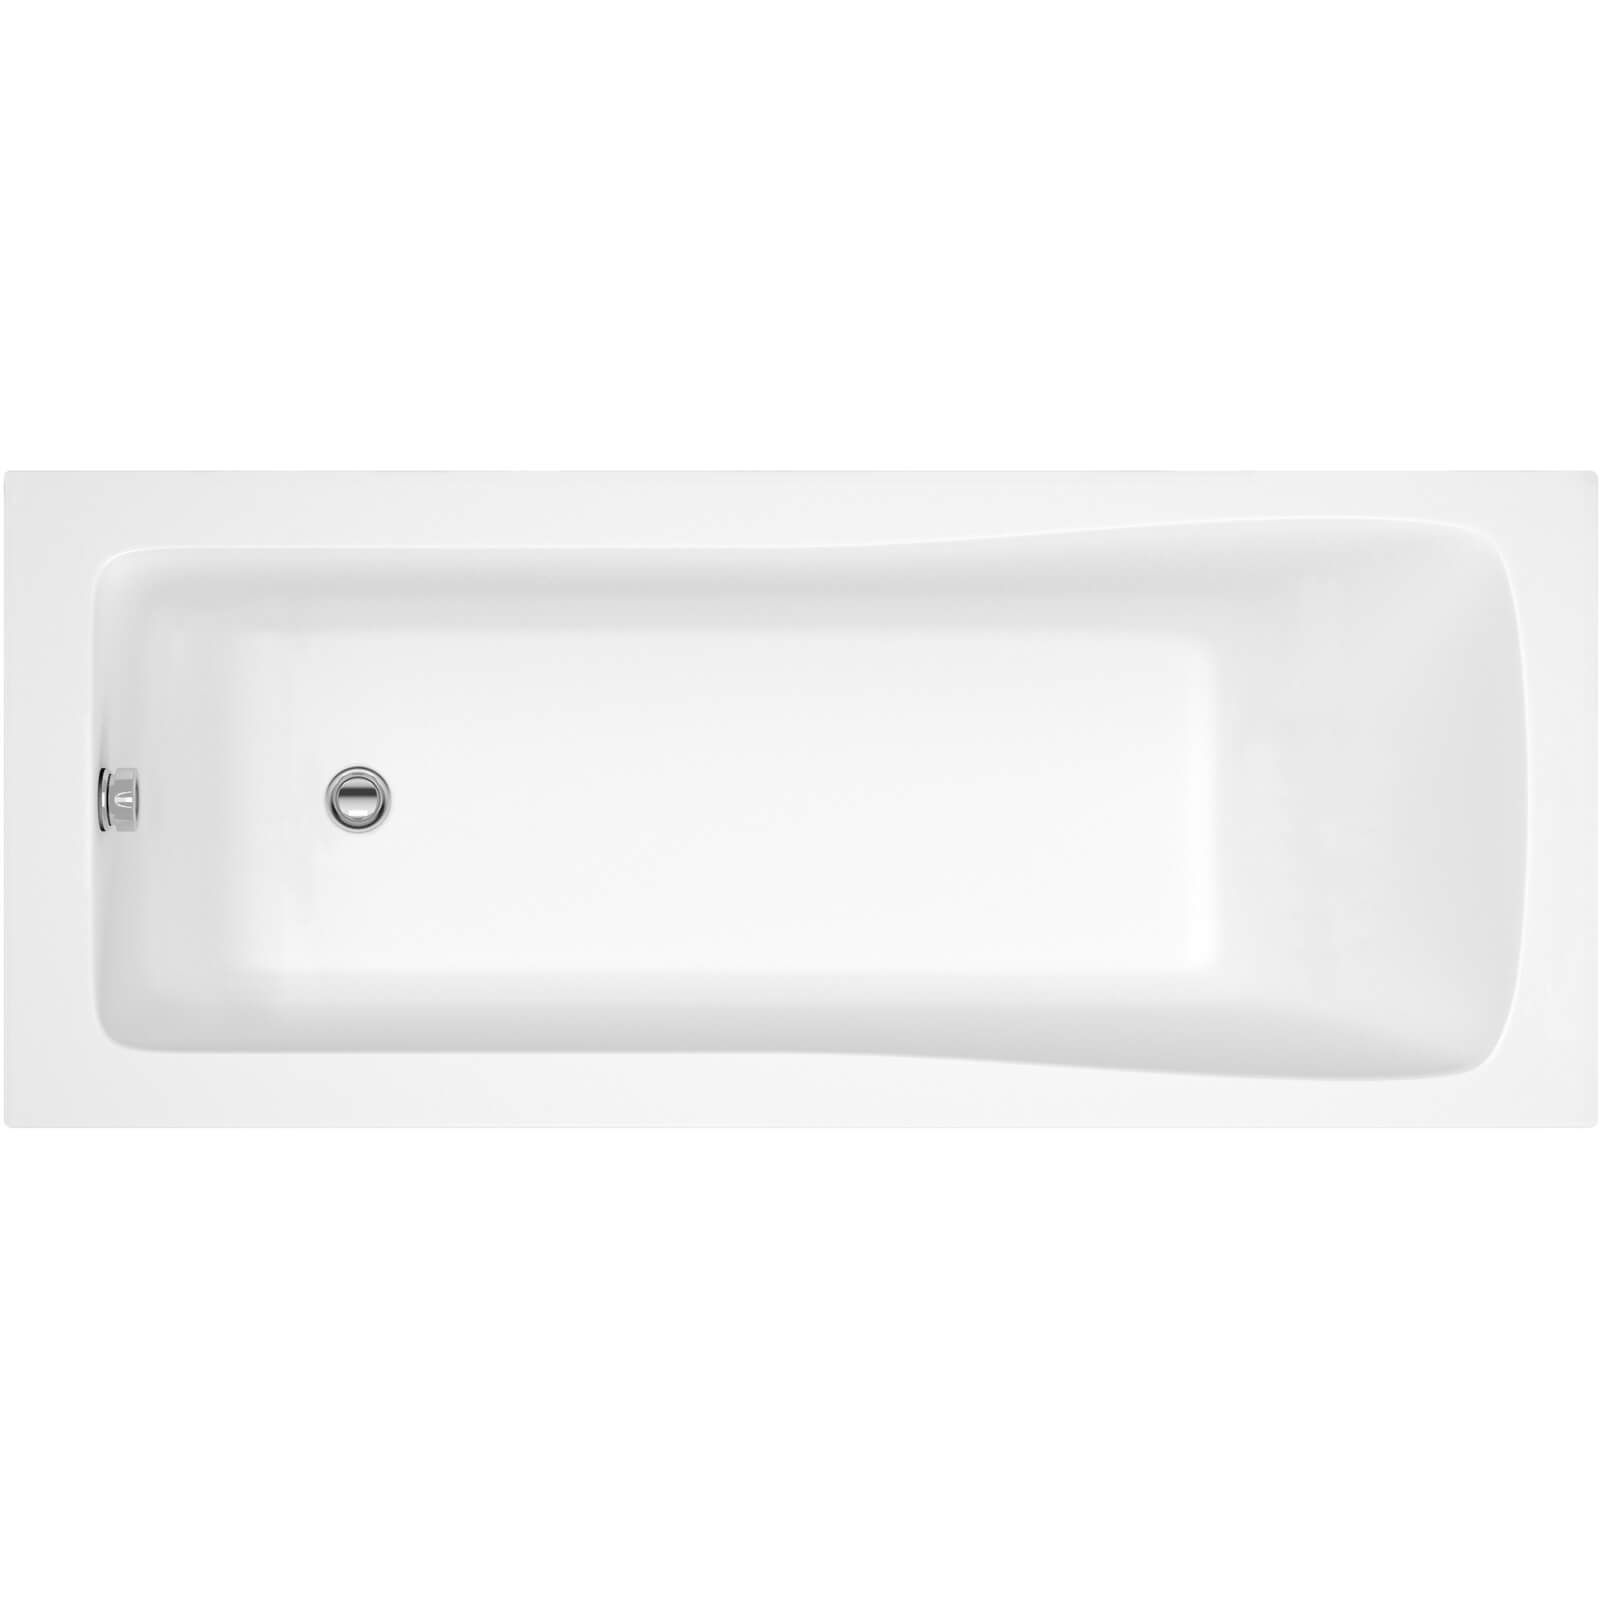 Photo of Balterley Square Single Ended Bath - 1800 X 800mm